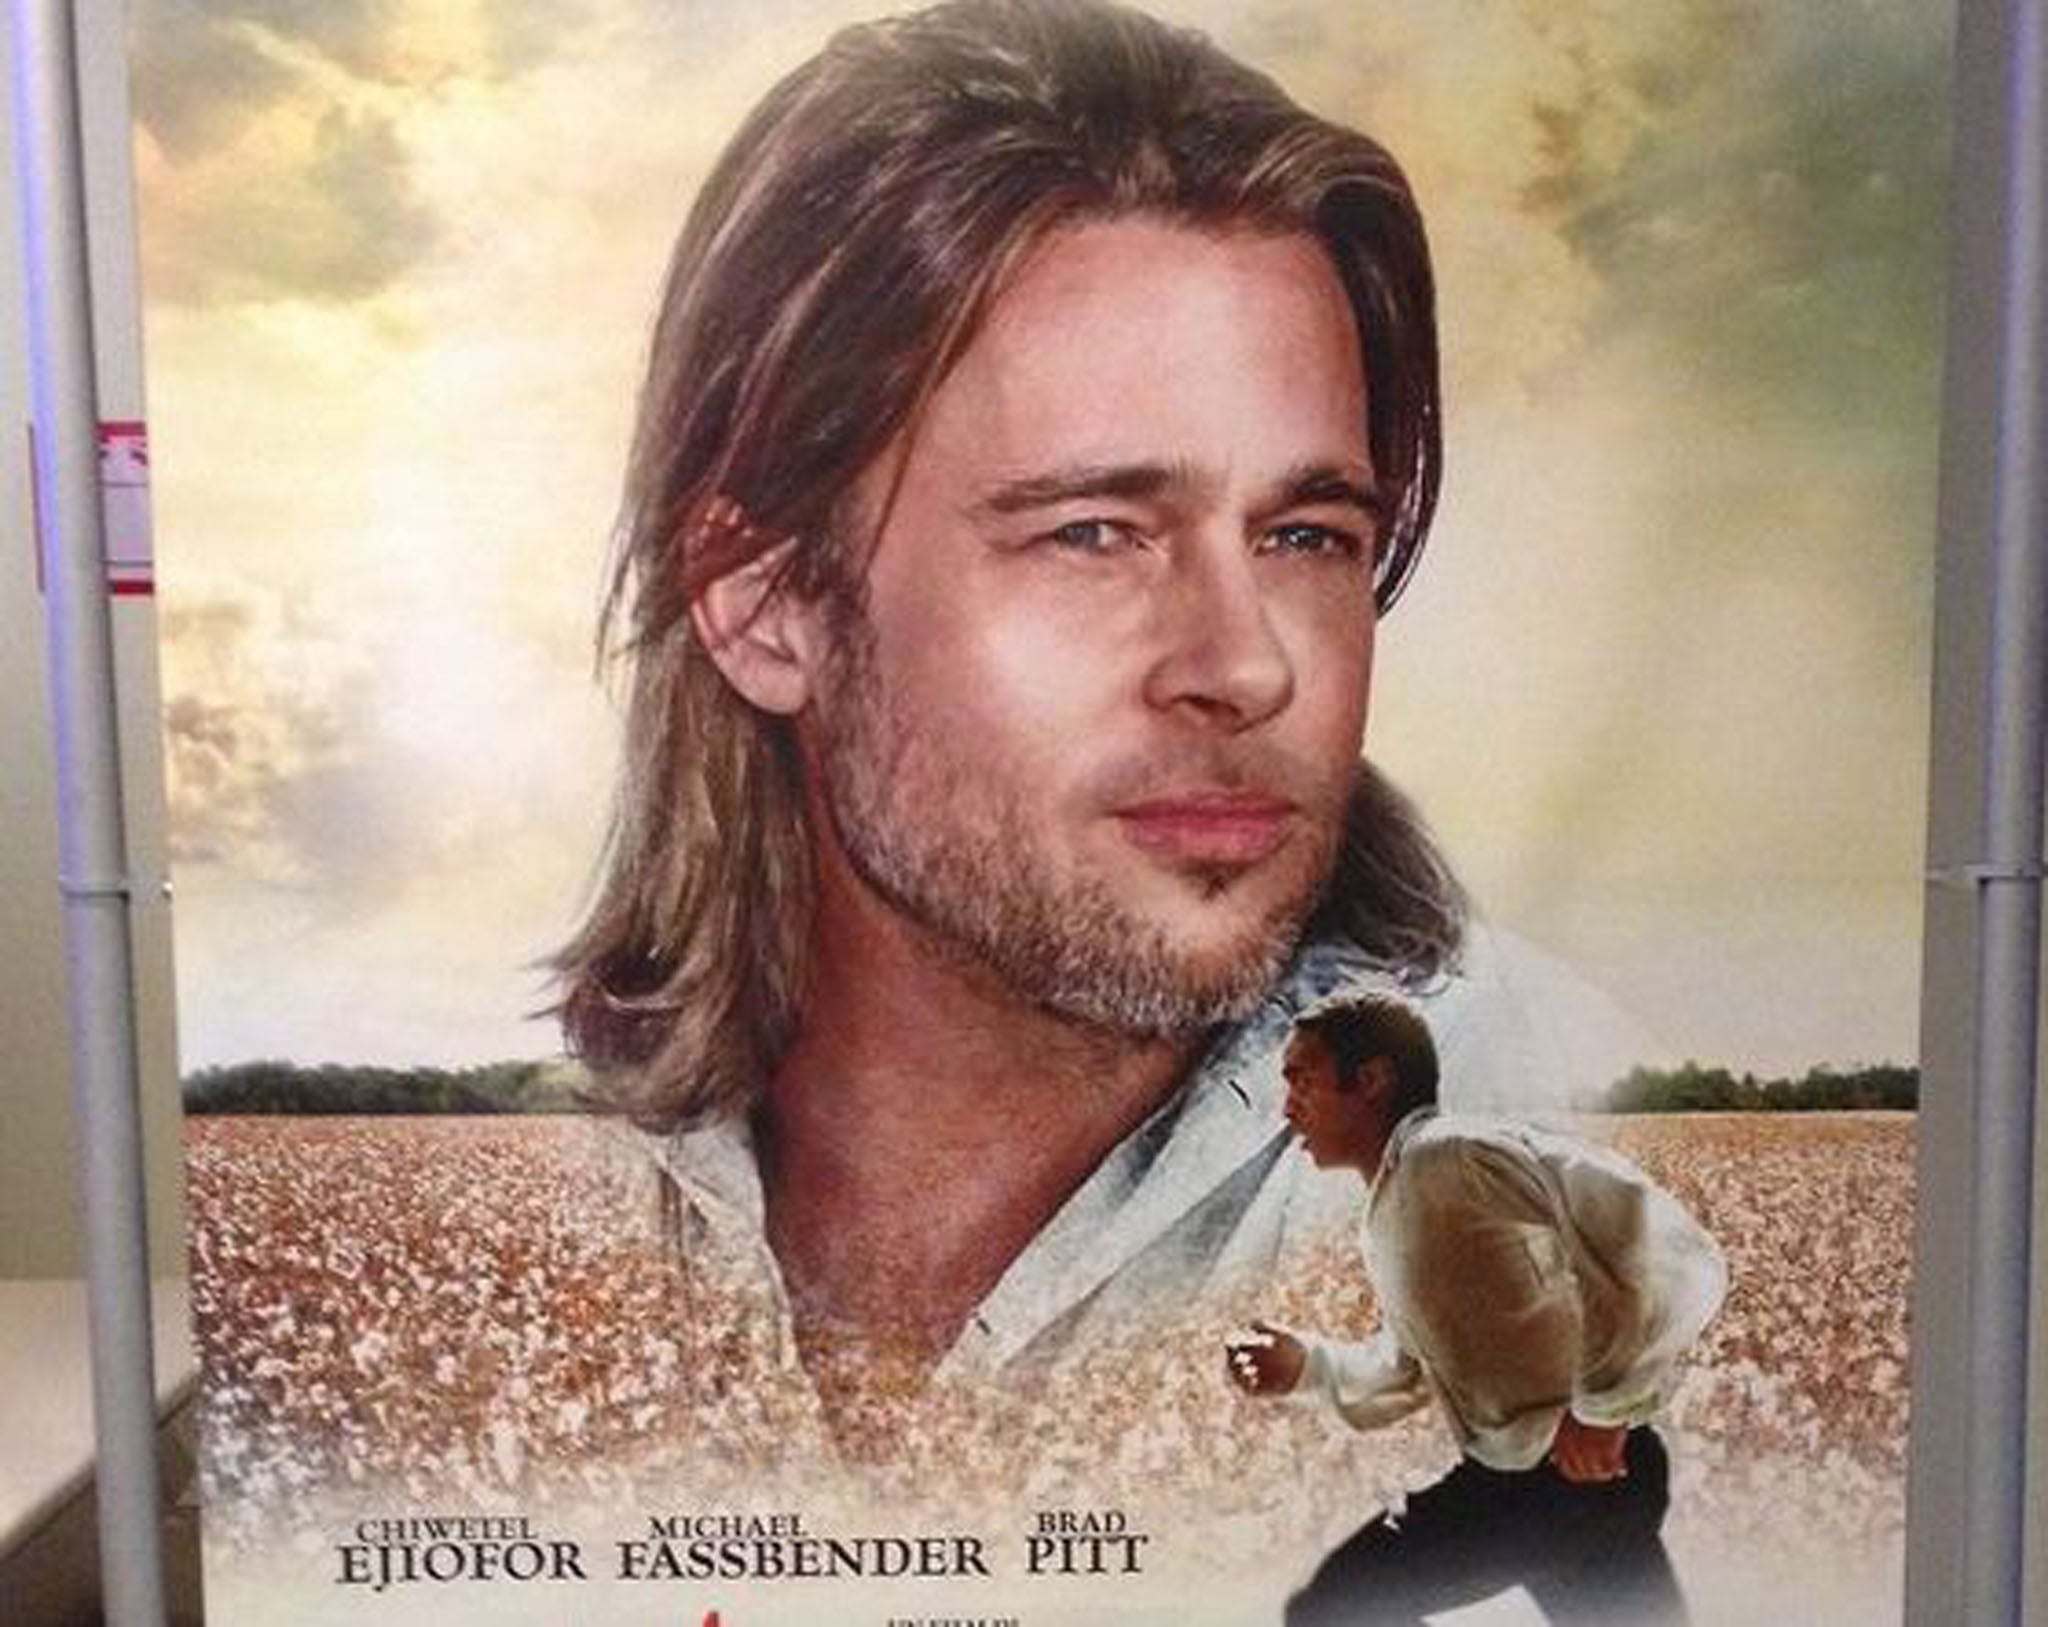 Italian cinema posters for the Oscar-tipped drama 12 Years A Slave were criticised for promoting the film’s white stars ahead of its black protagonist